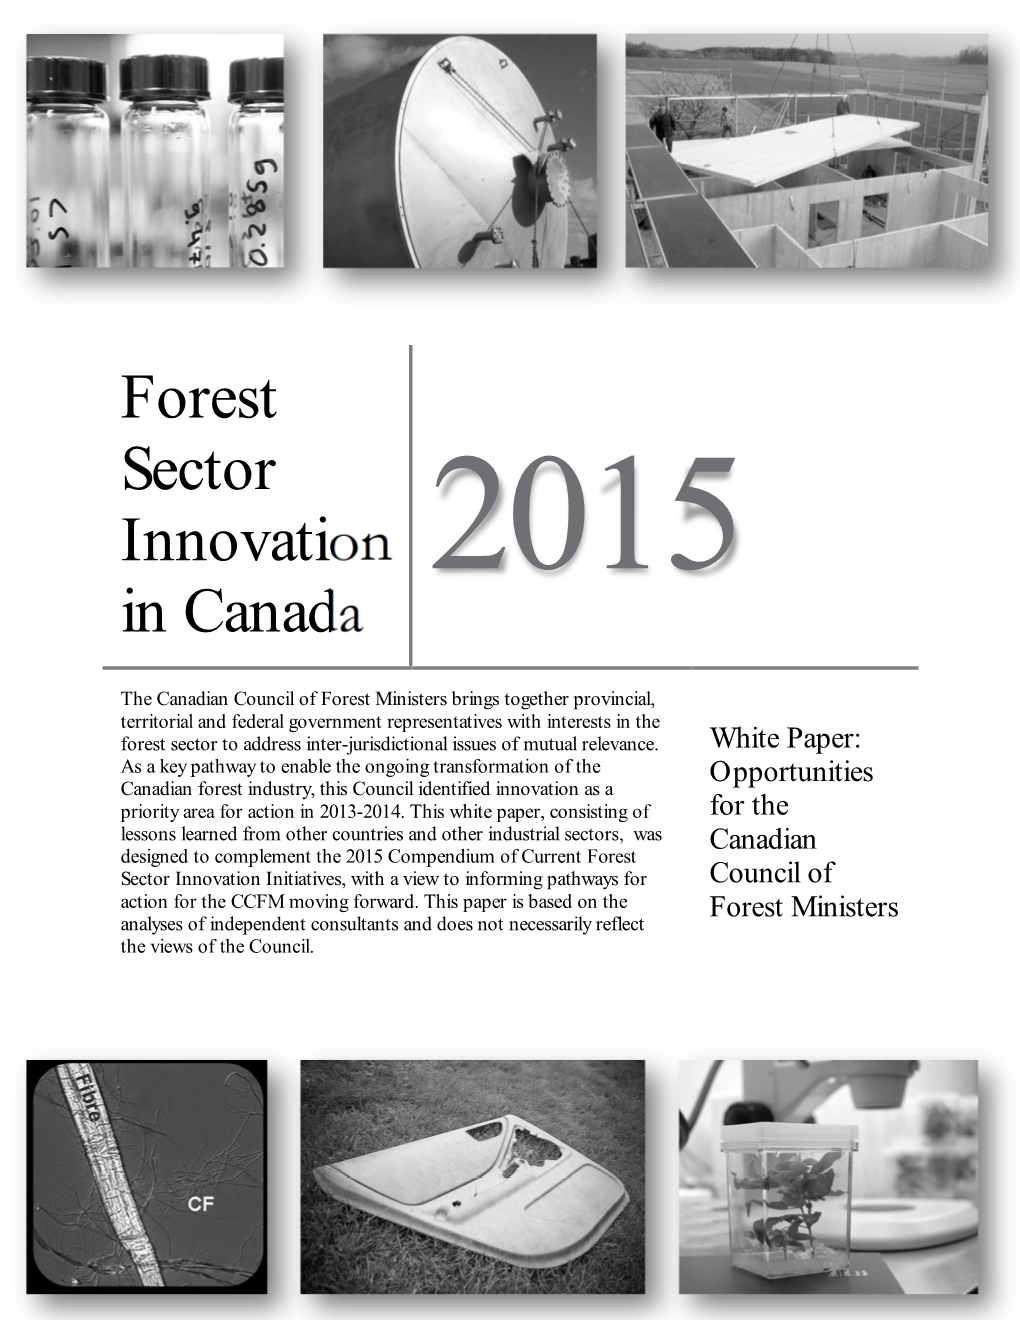 Forest Sector Innovation in Canada Through the Merger of the Three Leading Canadian Forest Research Institutions: Paprican, FERIC and Forintek